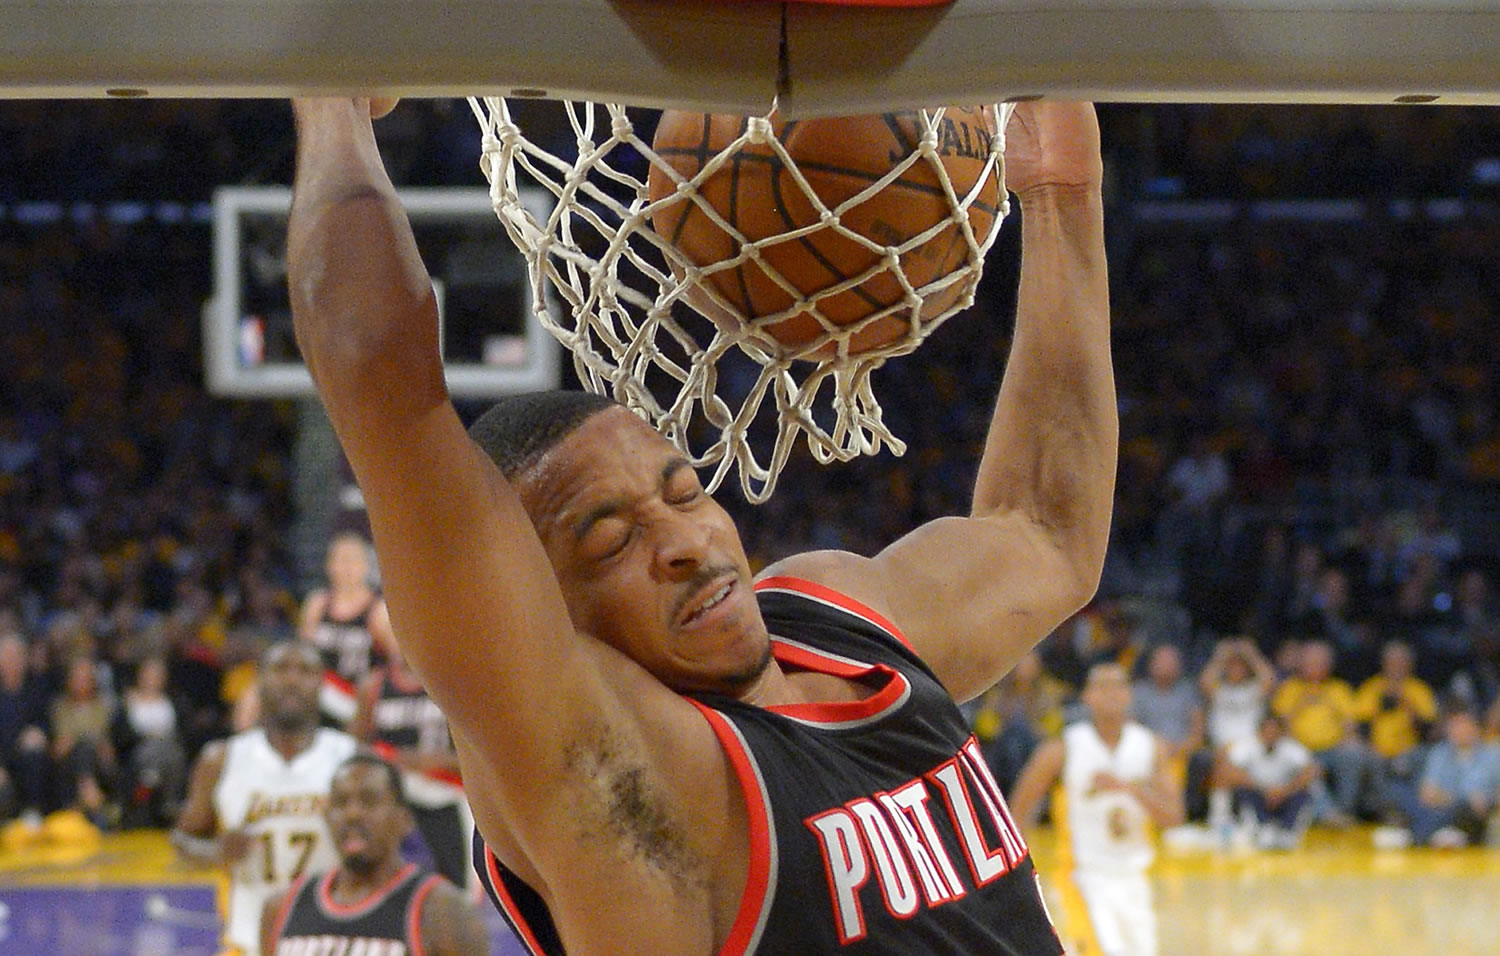 Portland Trail Blazers guard C.J. McCollum dunks during the second half of an NBA basketball game against the Los Angeles Lakers, Sunday, Nov. 22, 2015, in Los Angeles. The Trail Blazers won 107-93. (AP Photo/Mark J.